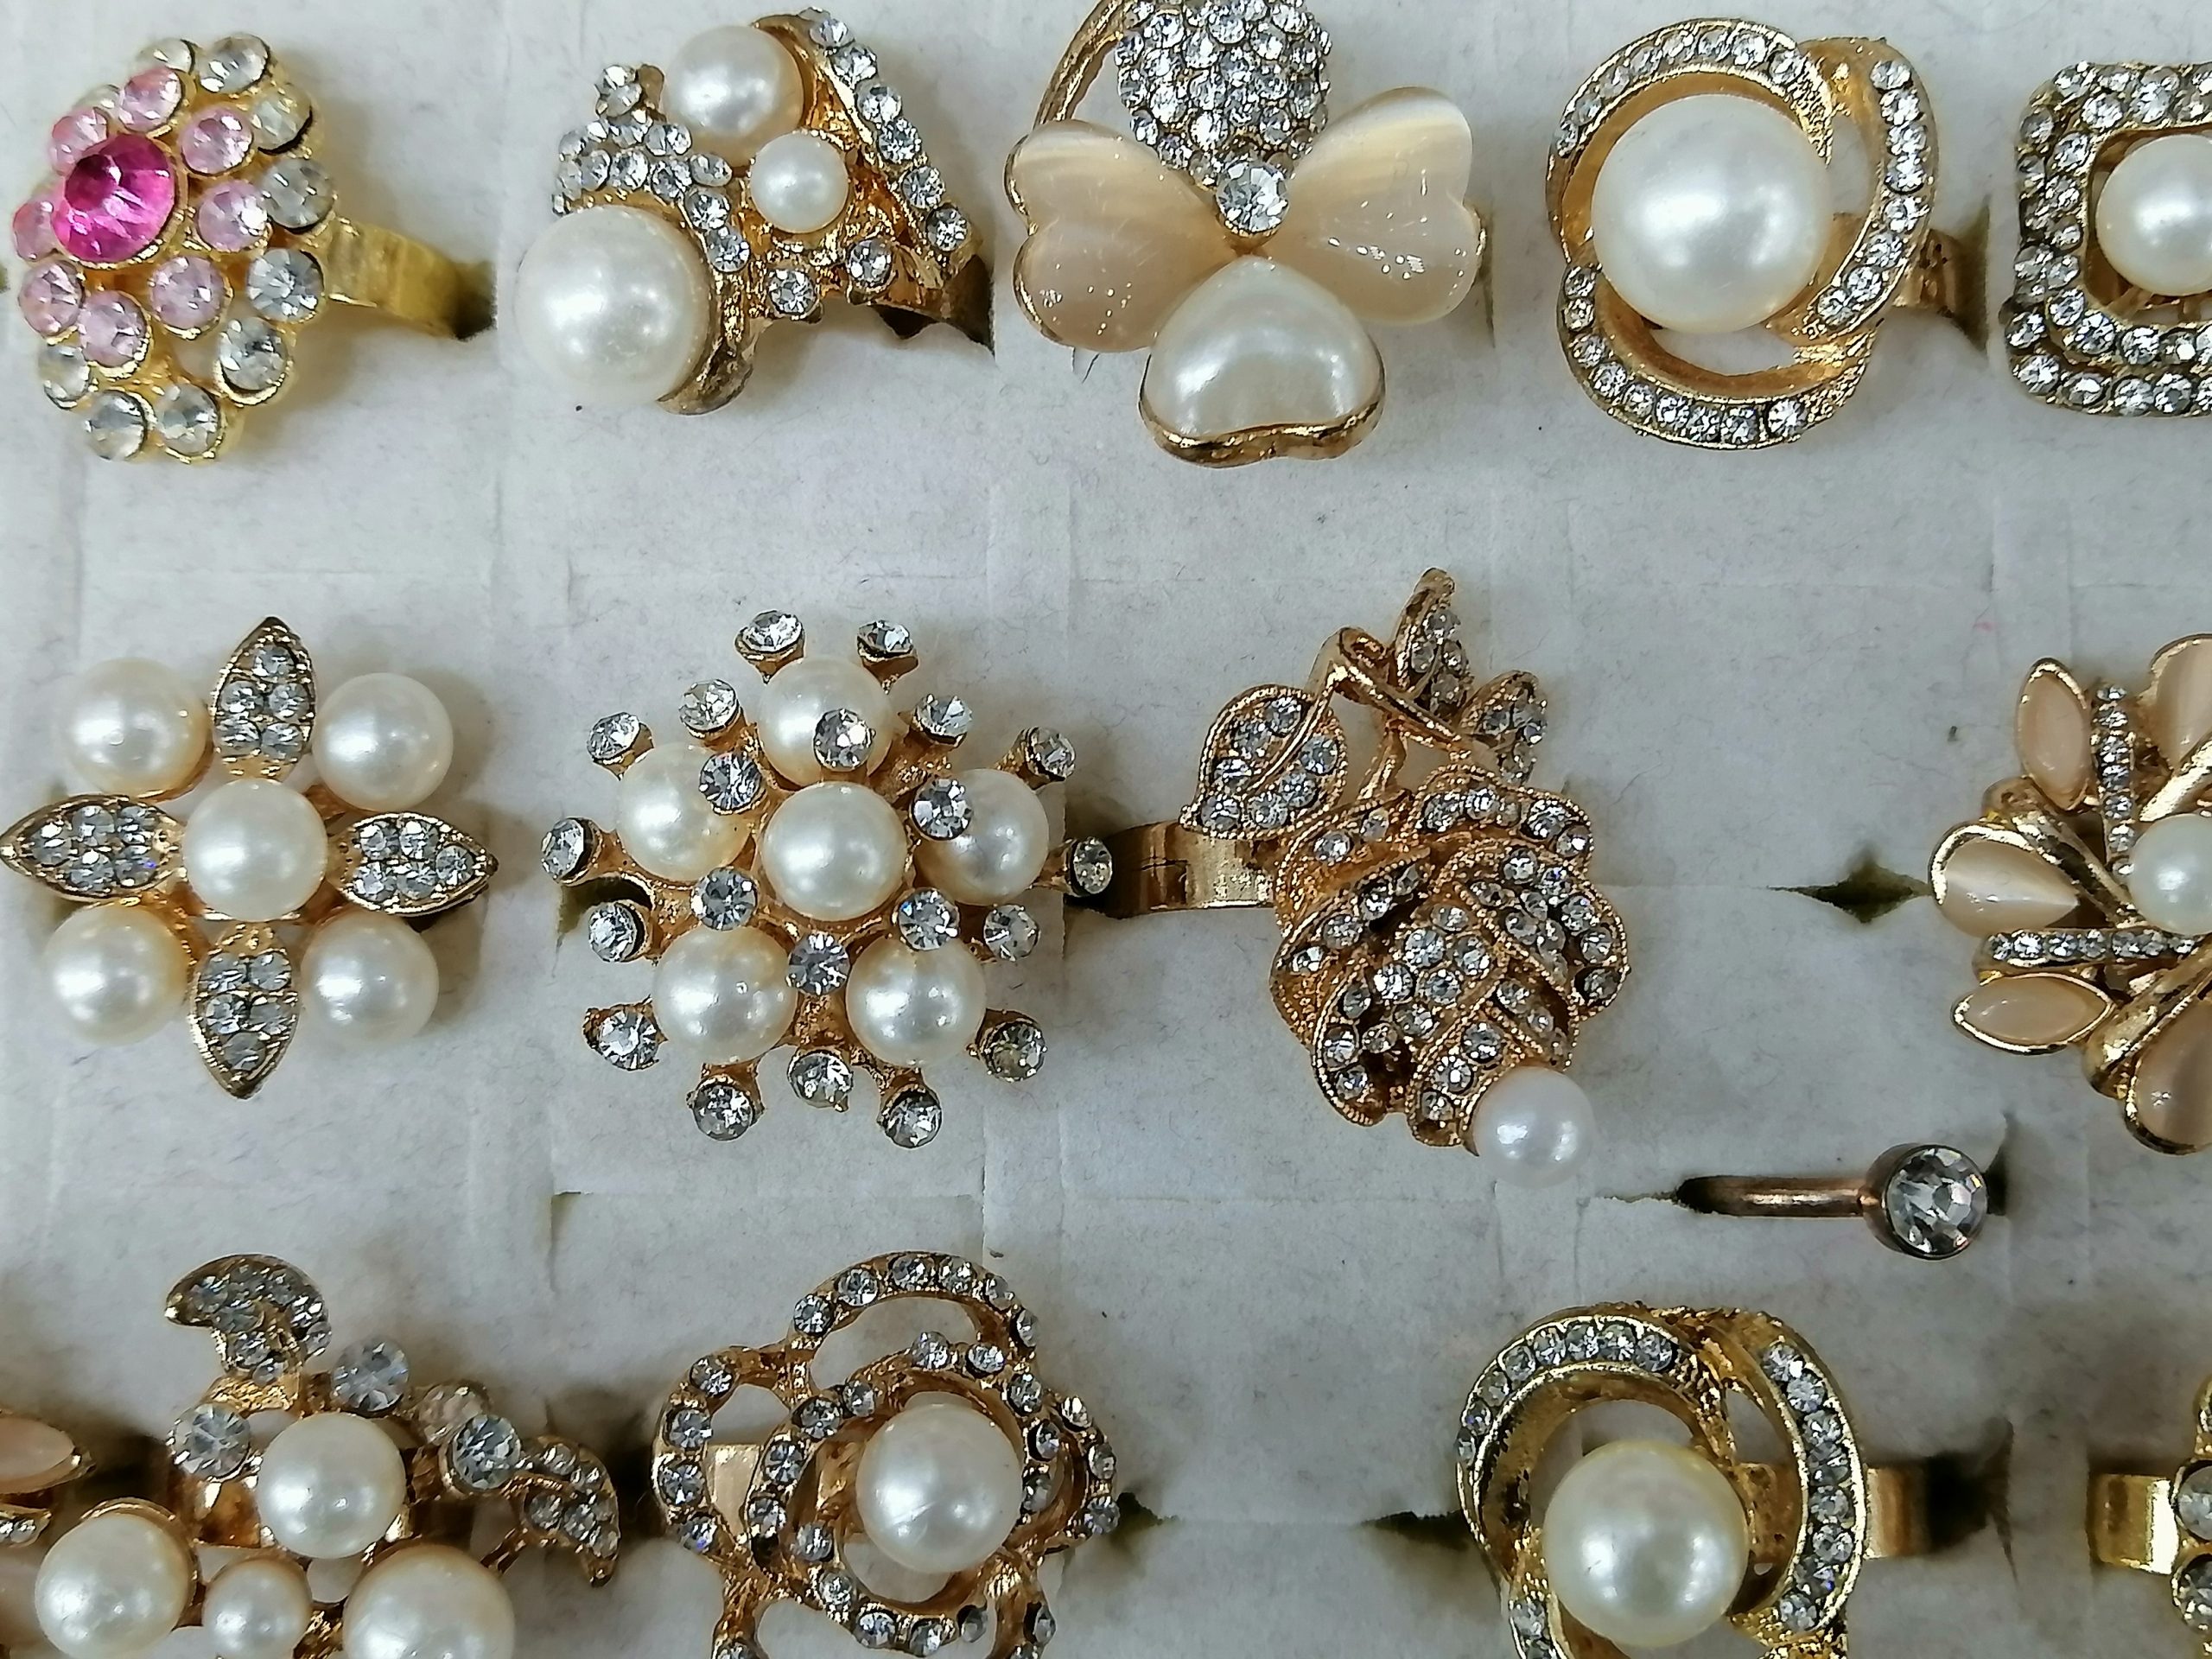 How To Store Necklaces Without Tangling